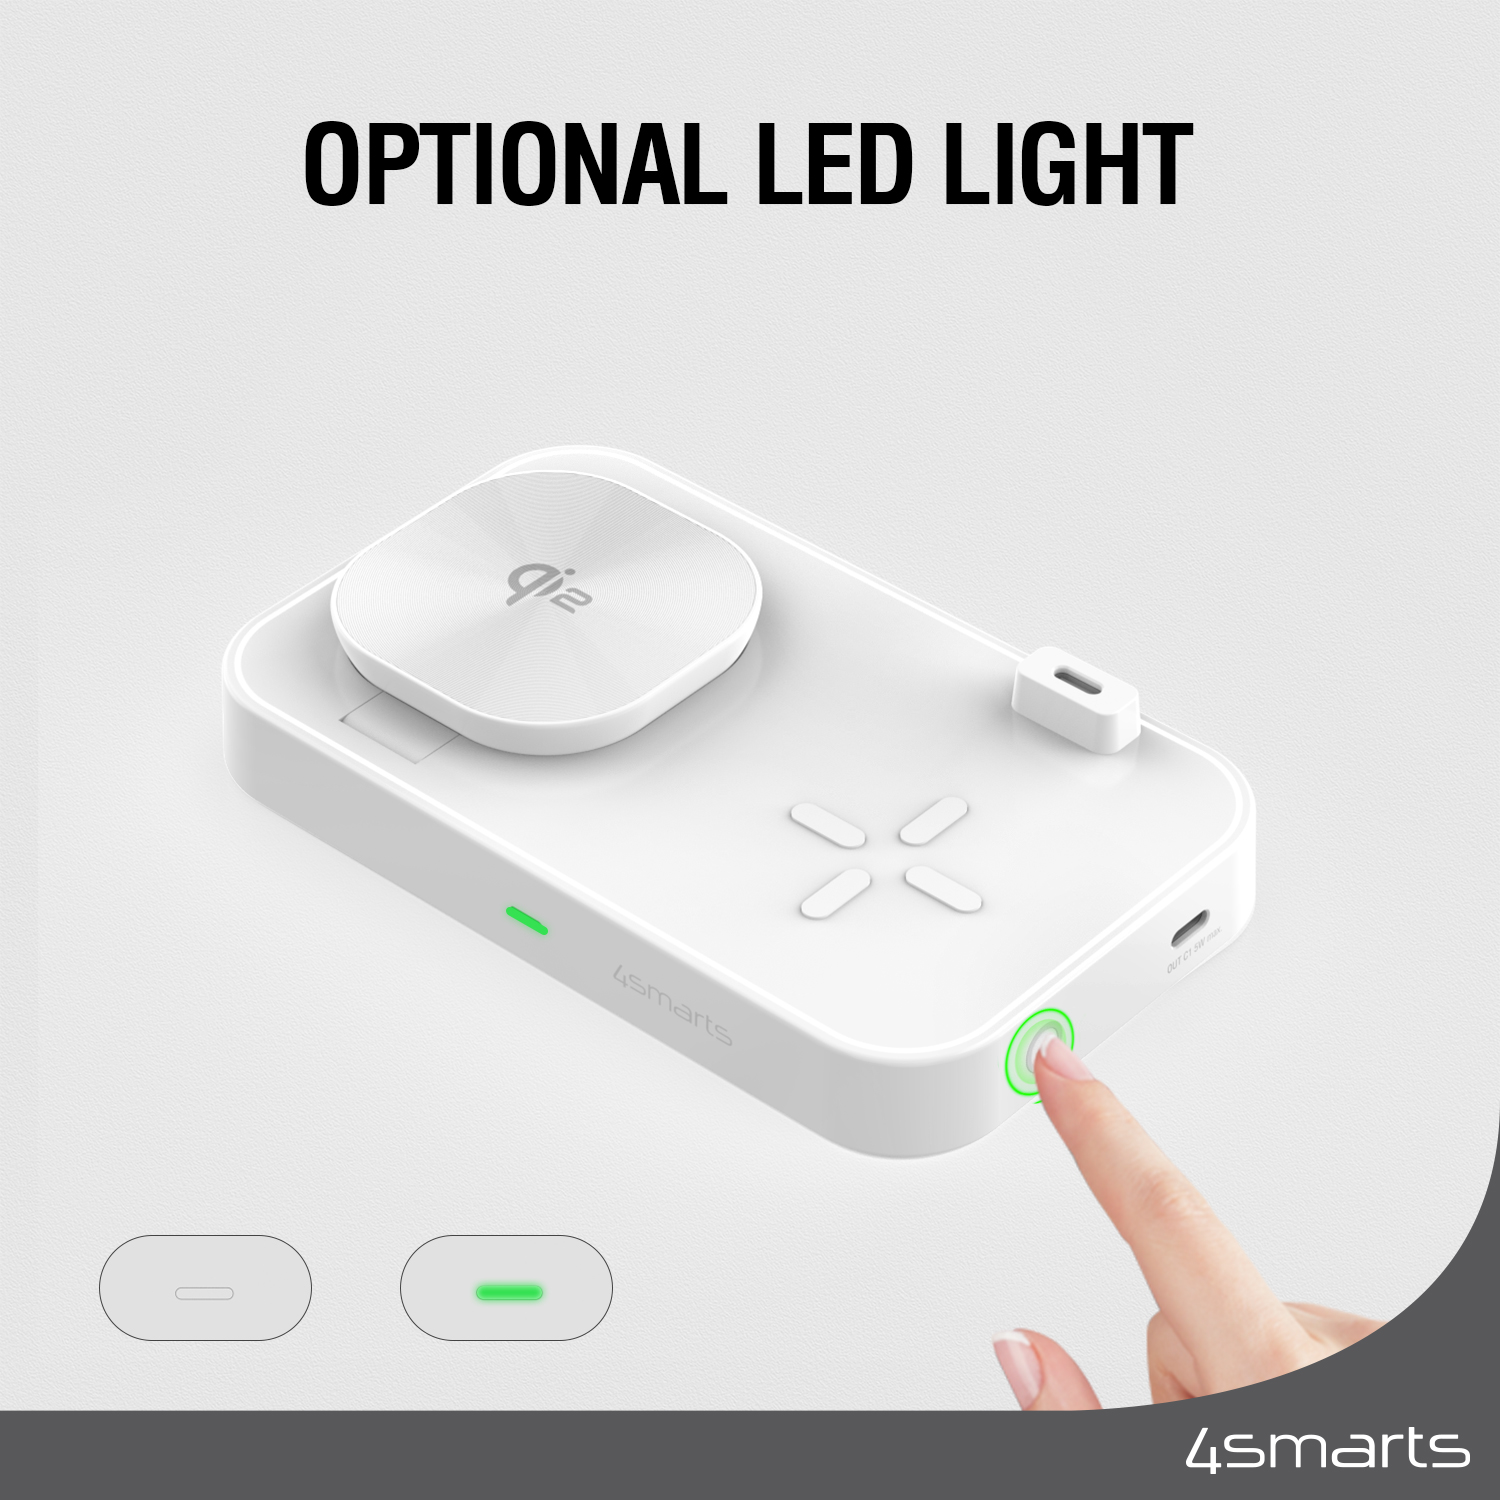 The 3-in-1 4smarts Qi2 Trident Charger has a built-in power light (LED) that can be turned off.